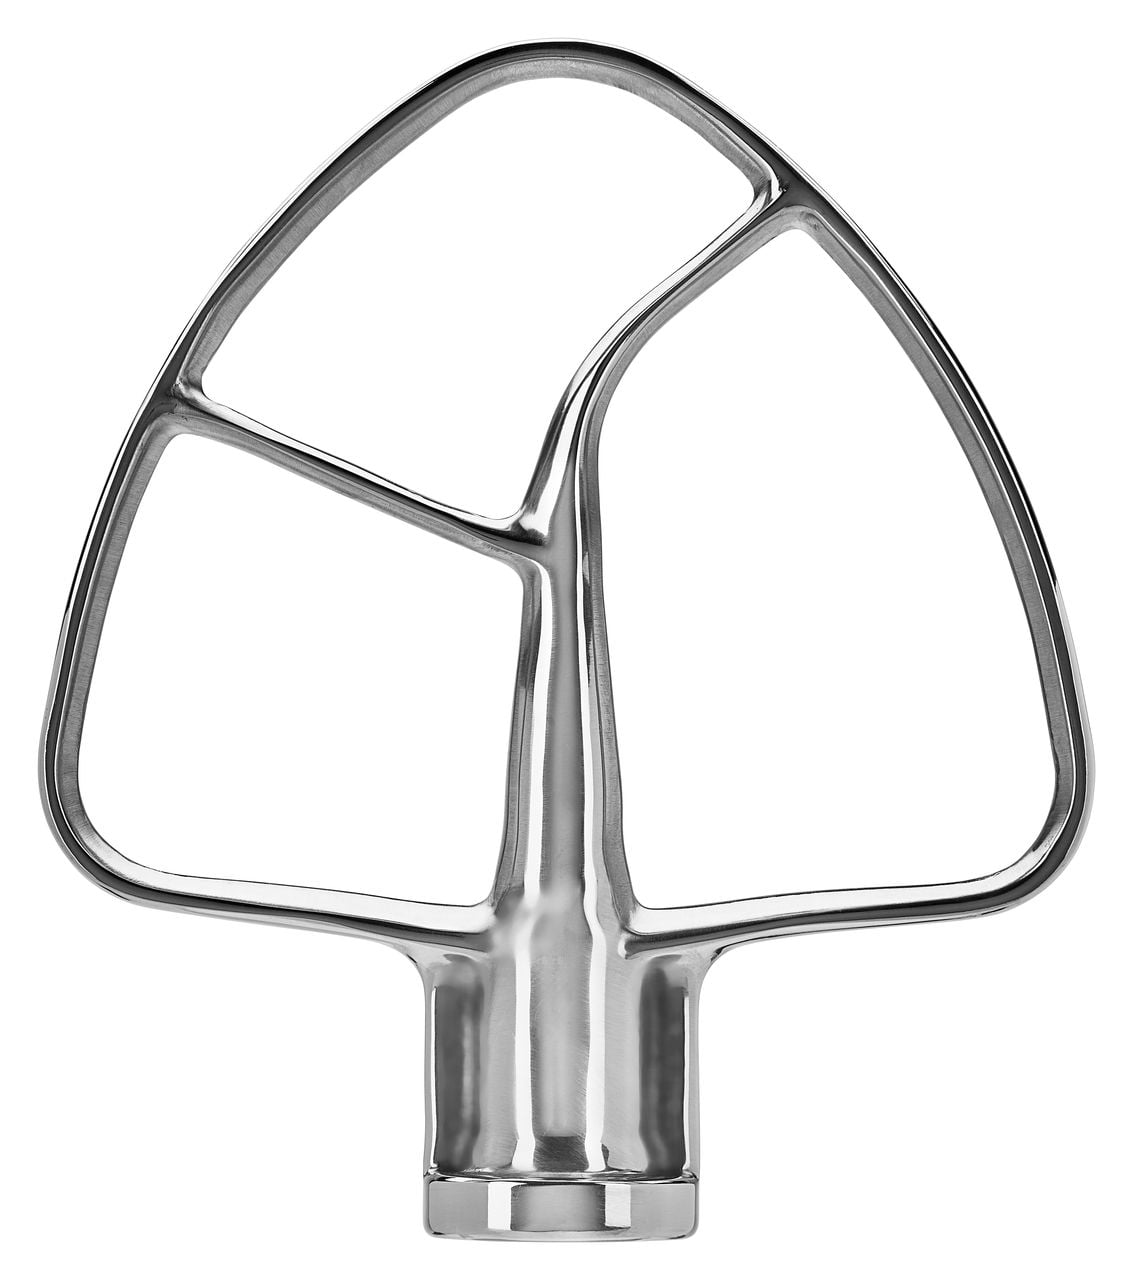 EGNic Stainless Steel Flat Beater Replacement for Kitchenaid 4.5-5 Quart  Tilt-Head Stand Mixer, Flat Beater Paddle Attachment for Kitchenaid Mixers